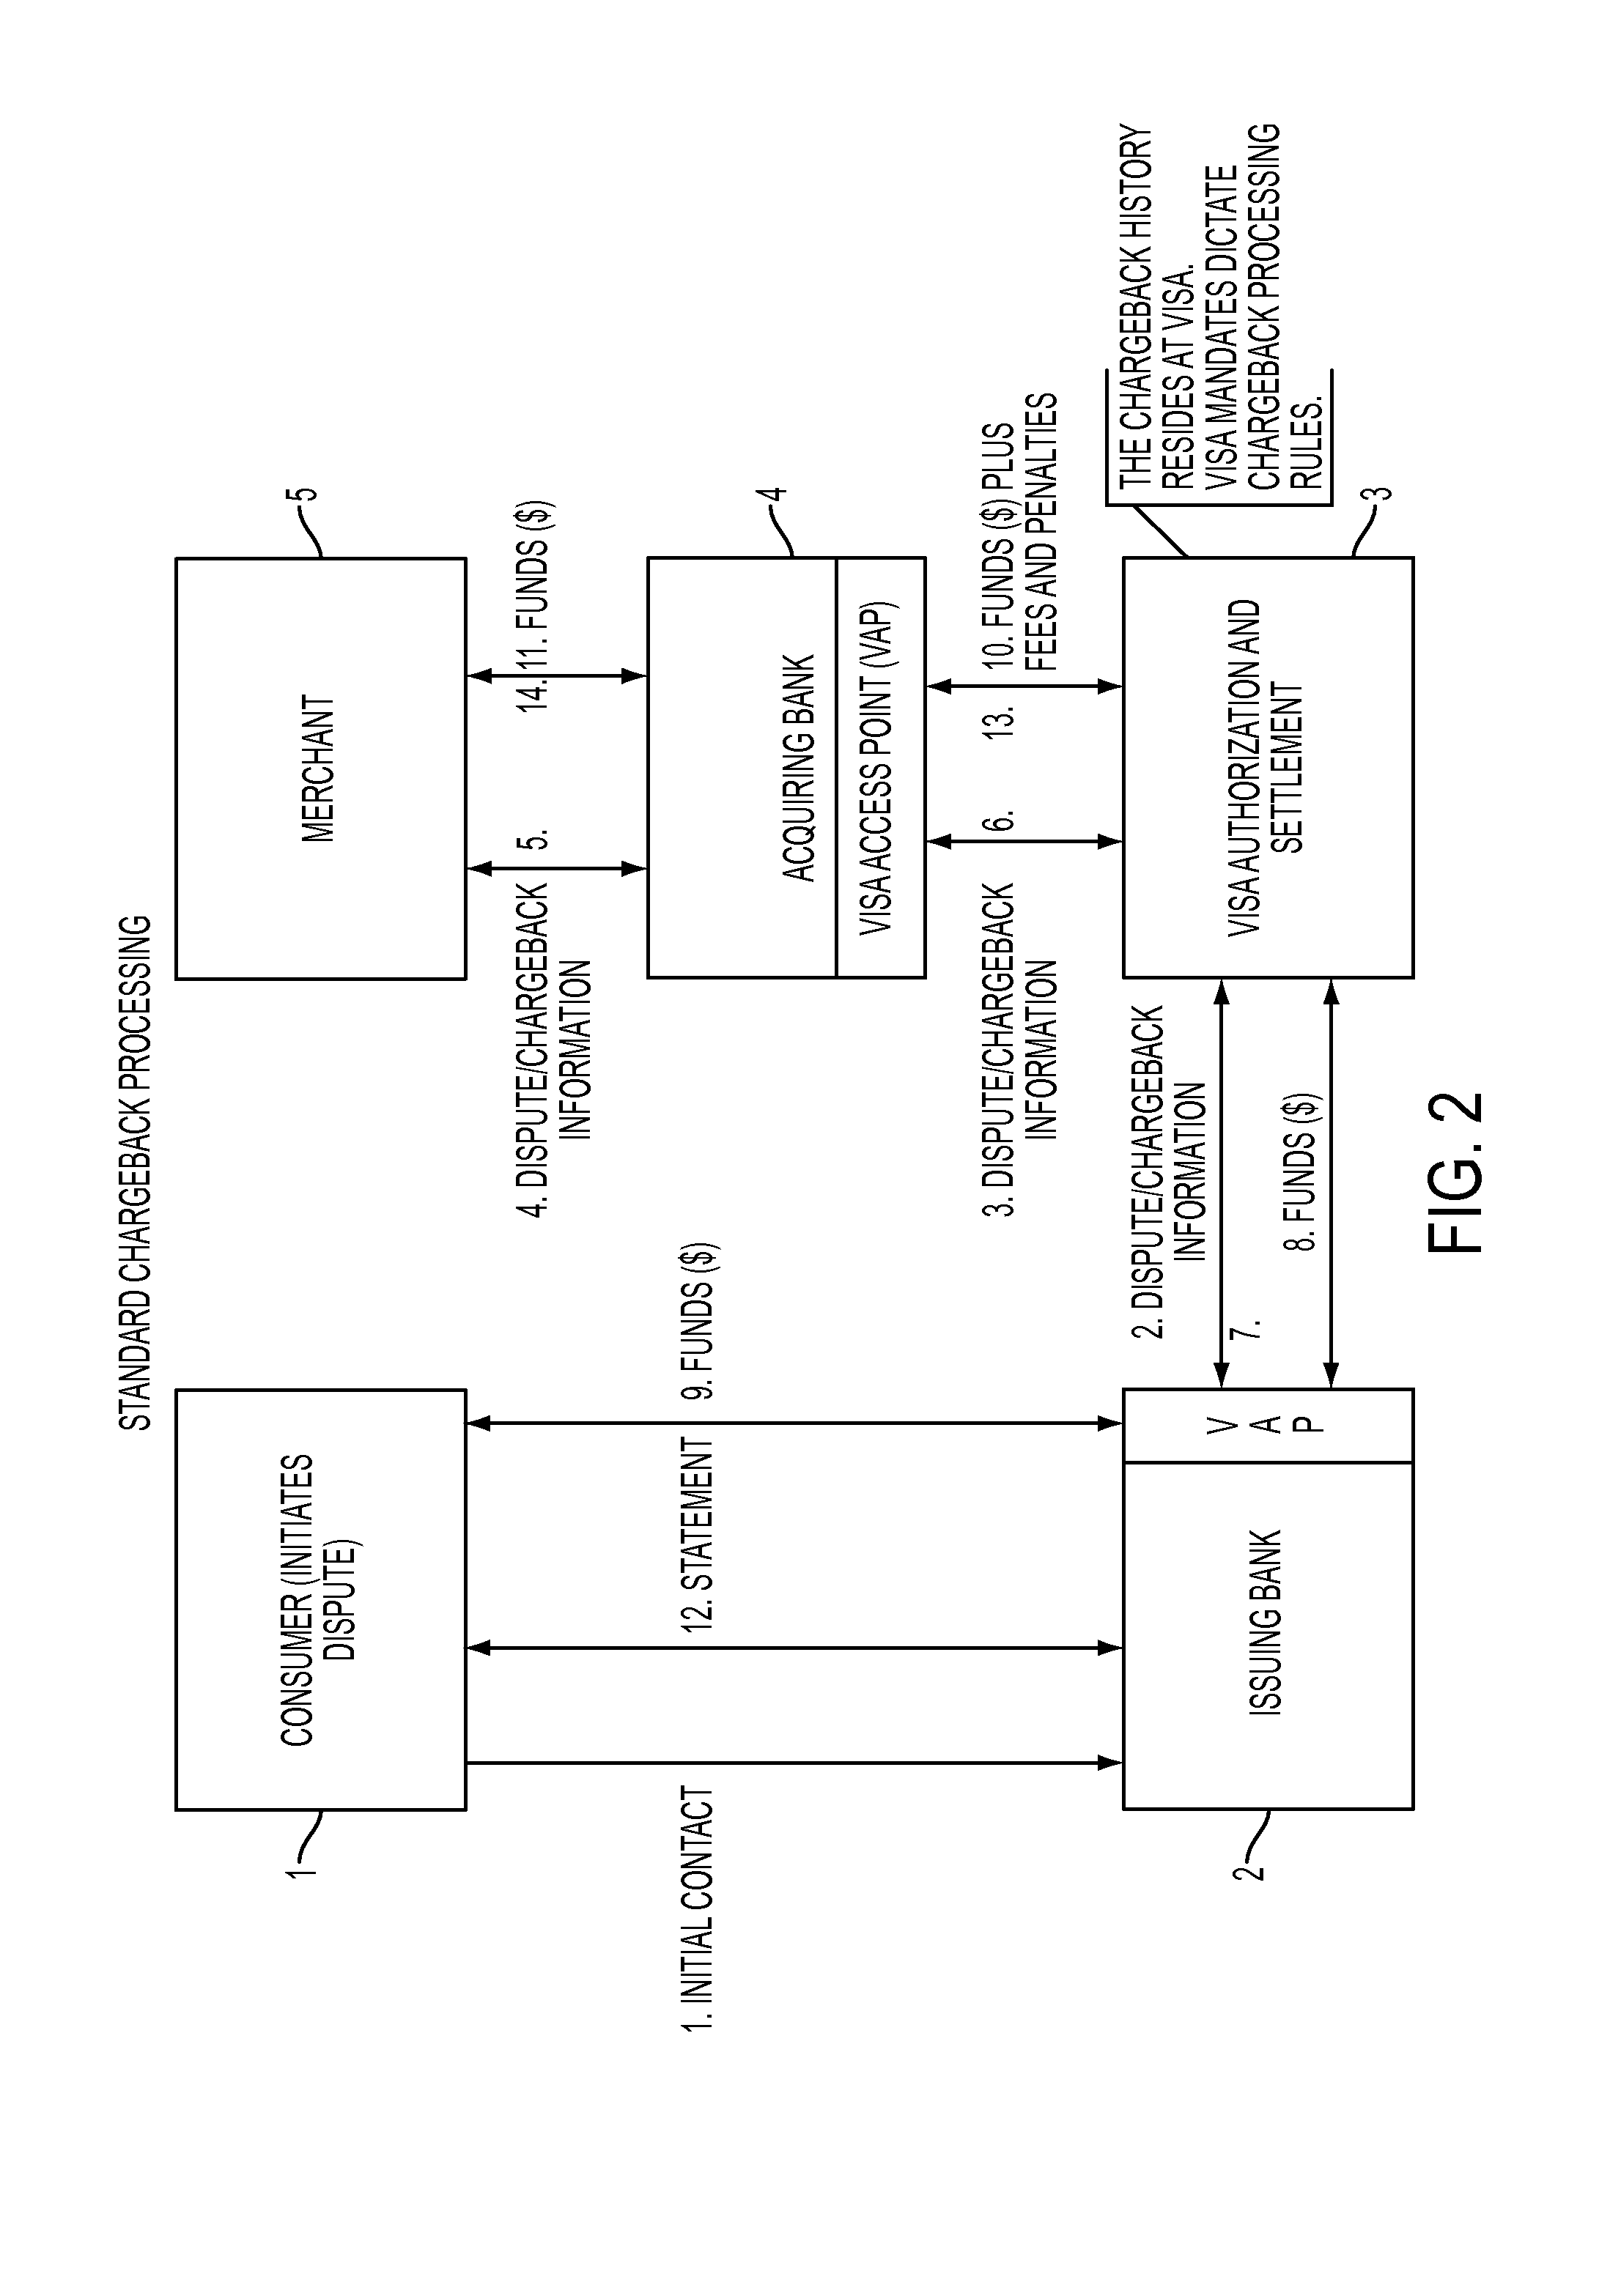 Method and apparatus for processing a cardholder's inquiry or dispute about a credit/charge card